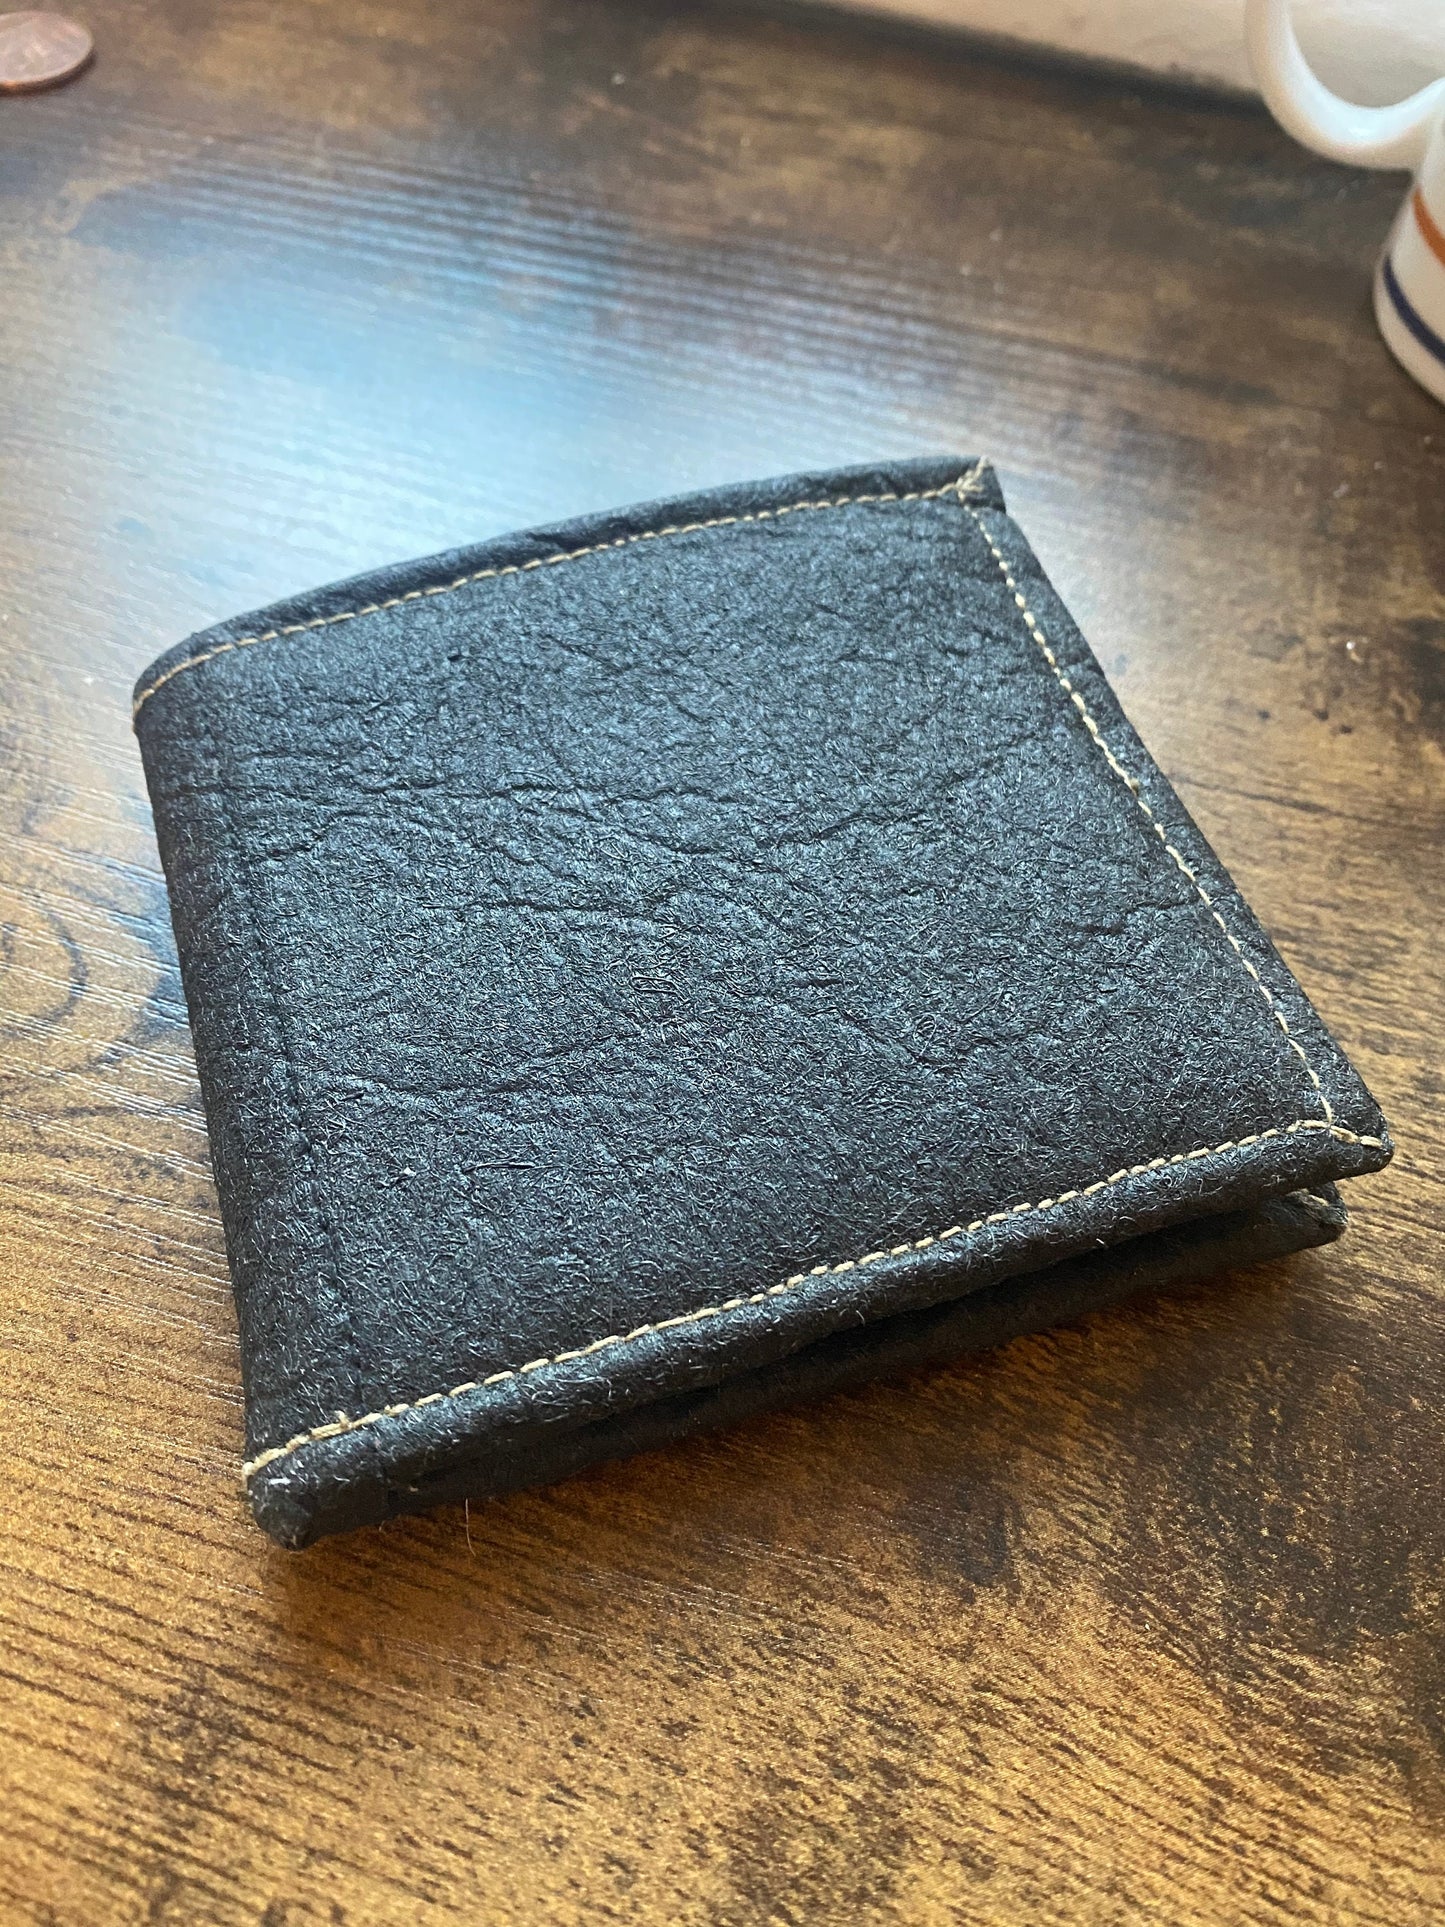 Black Wallet - Pinatex and hemp Vegetarian wallet made out from all natural fibres - Black or Brown - 100% plant fabrics, vegan friendly